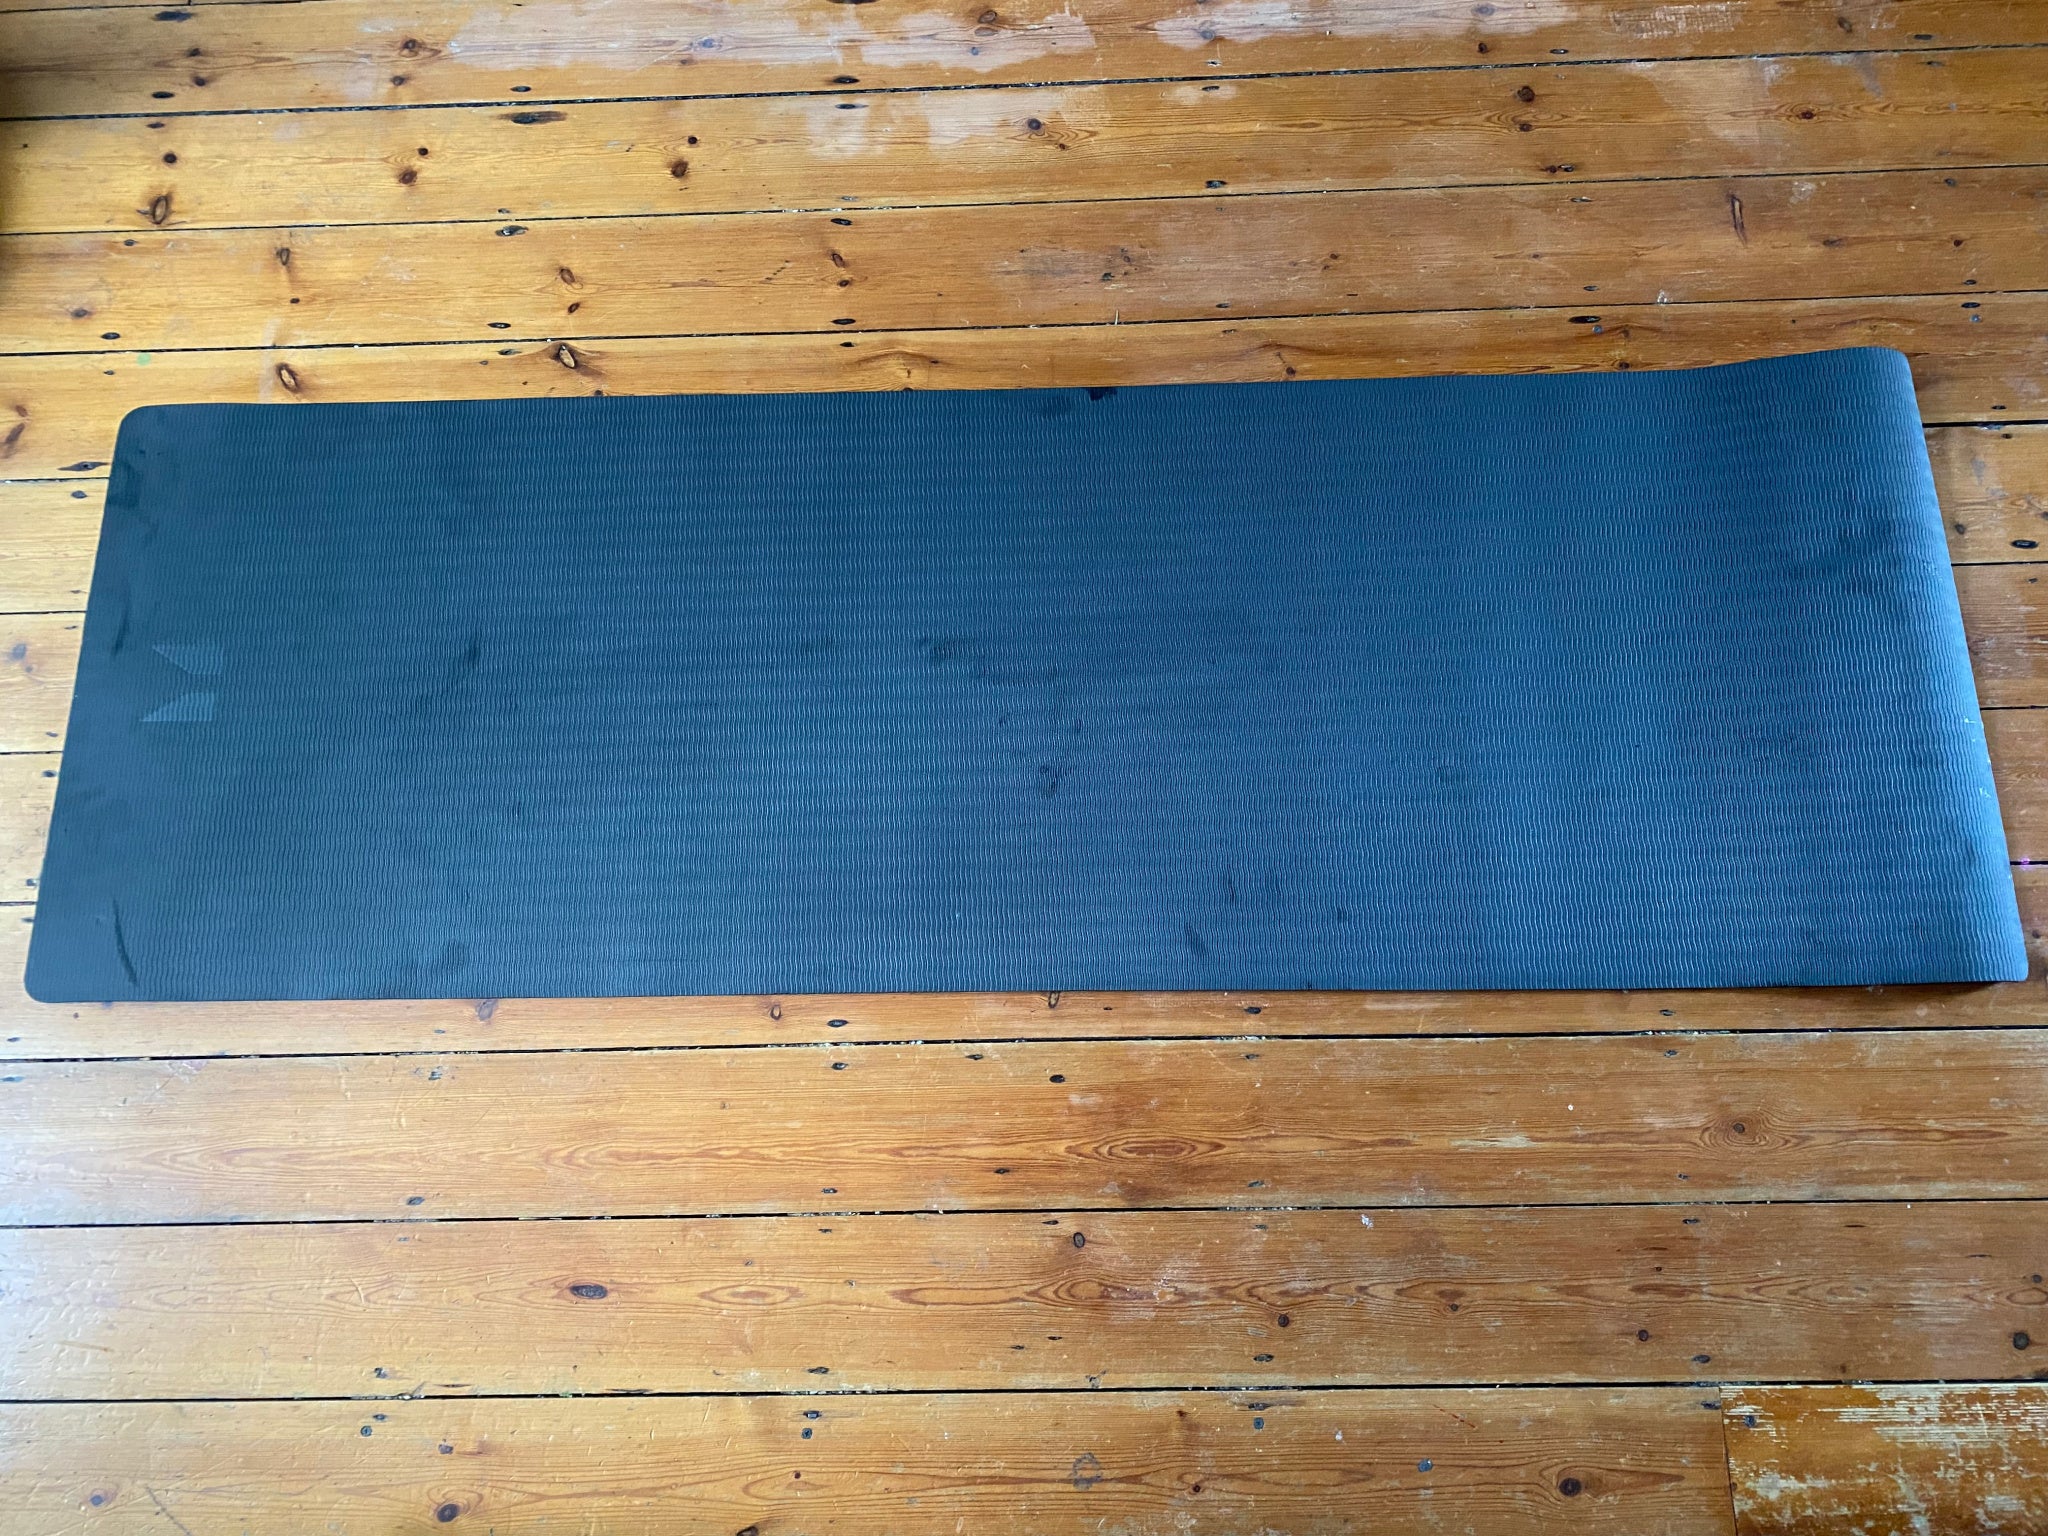 I upped the frequency of my yoga sessions to put this mat to the test